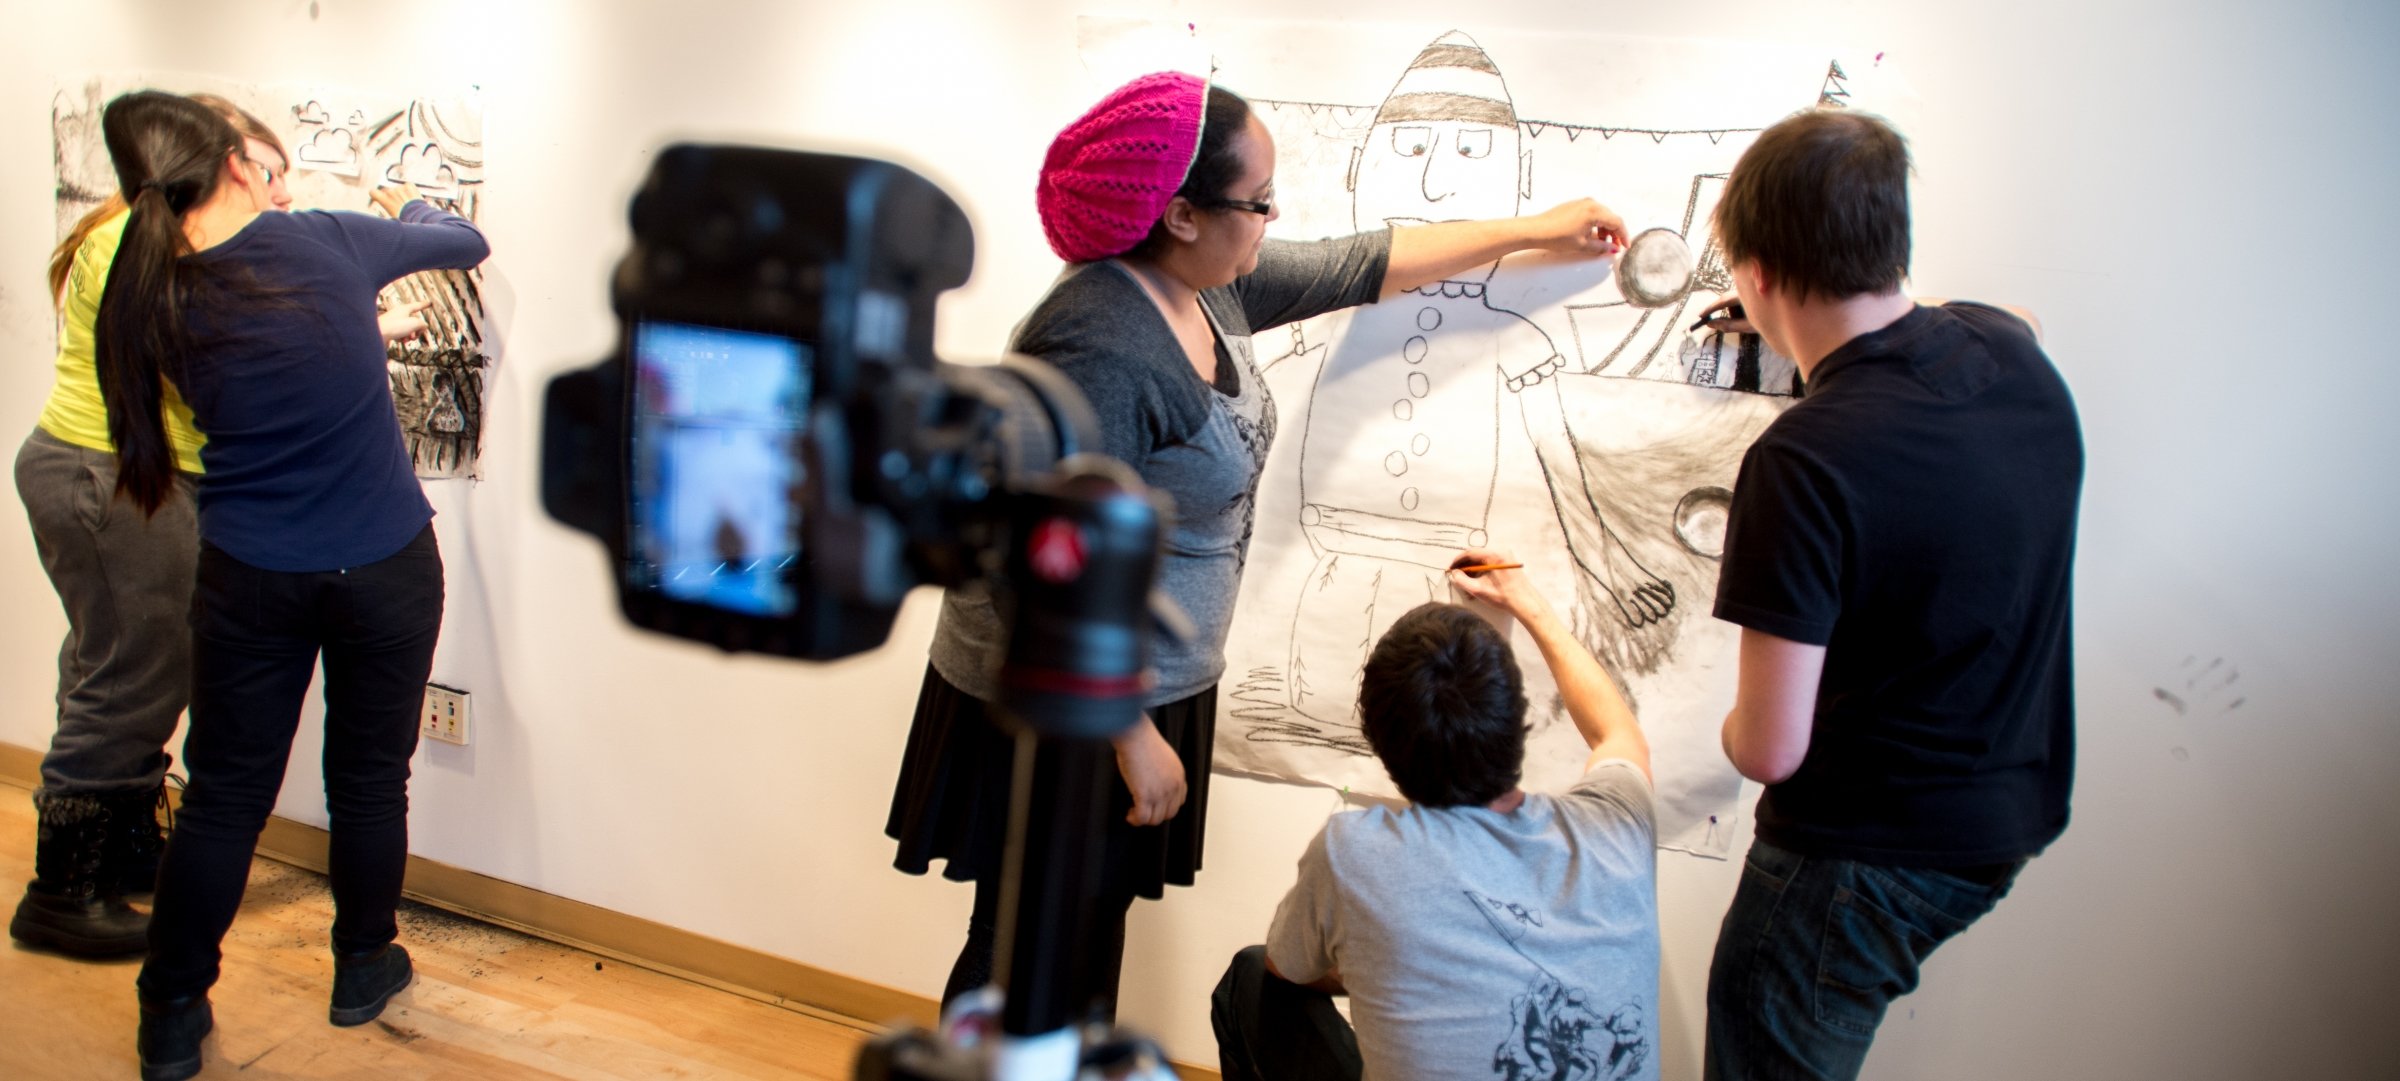 Faculty works with students on a large drawing on a wall with a camera looking on.